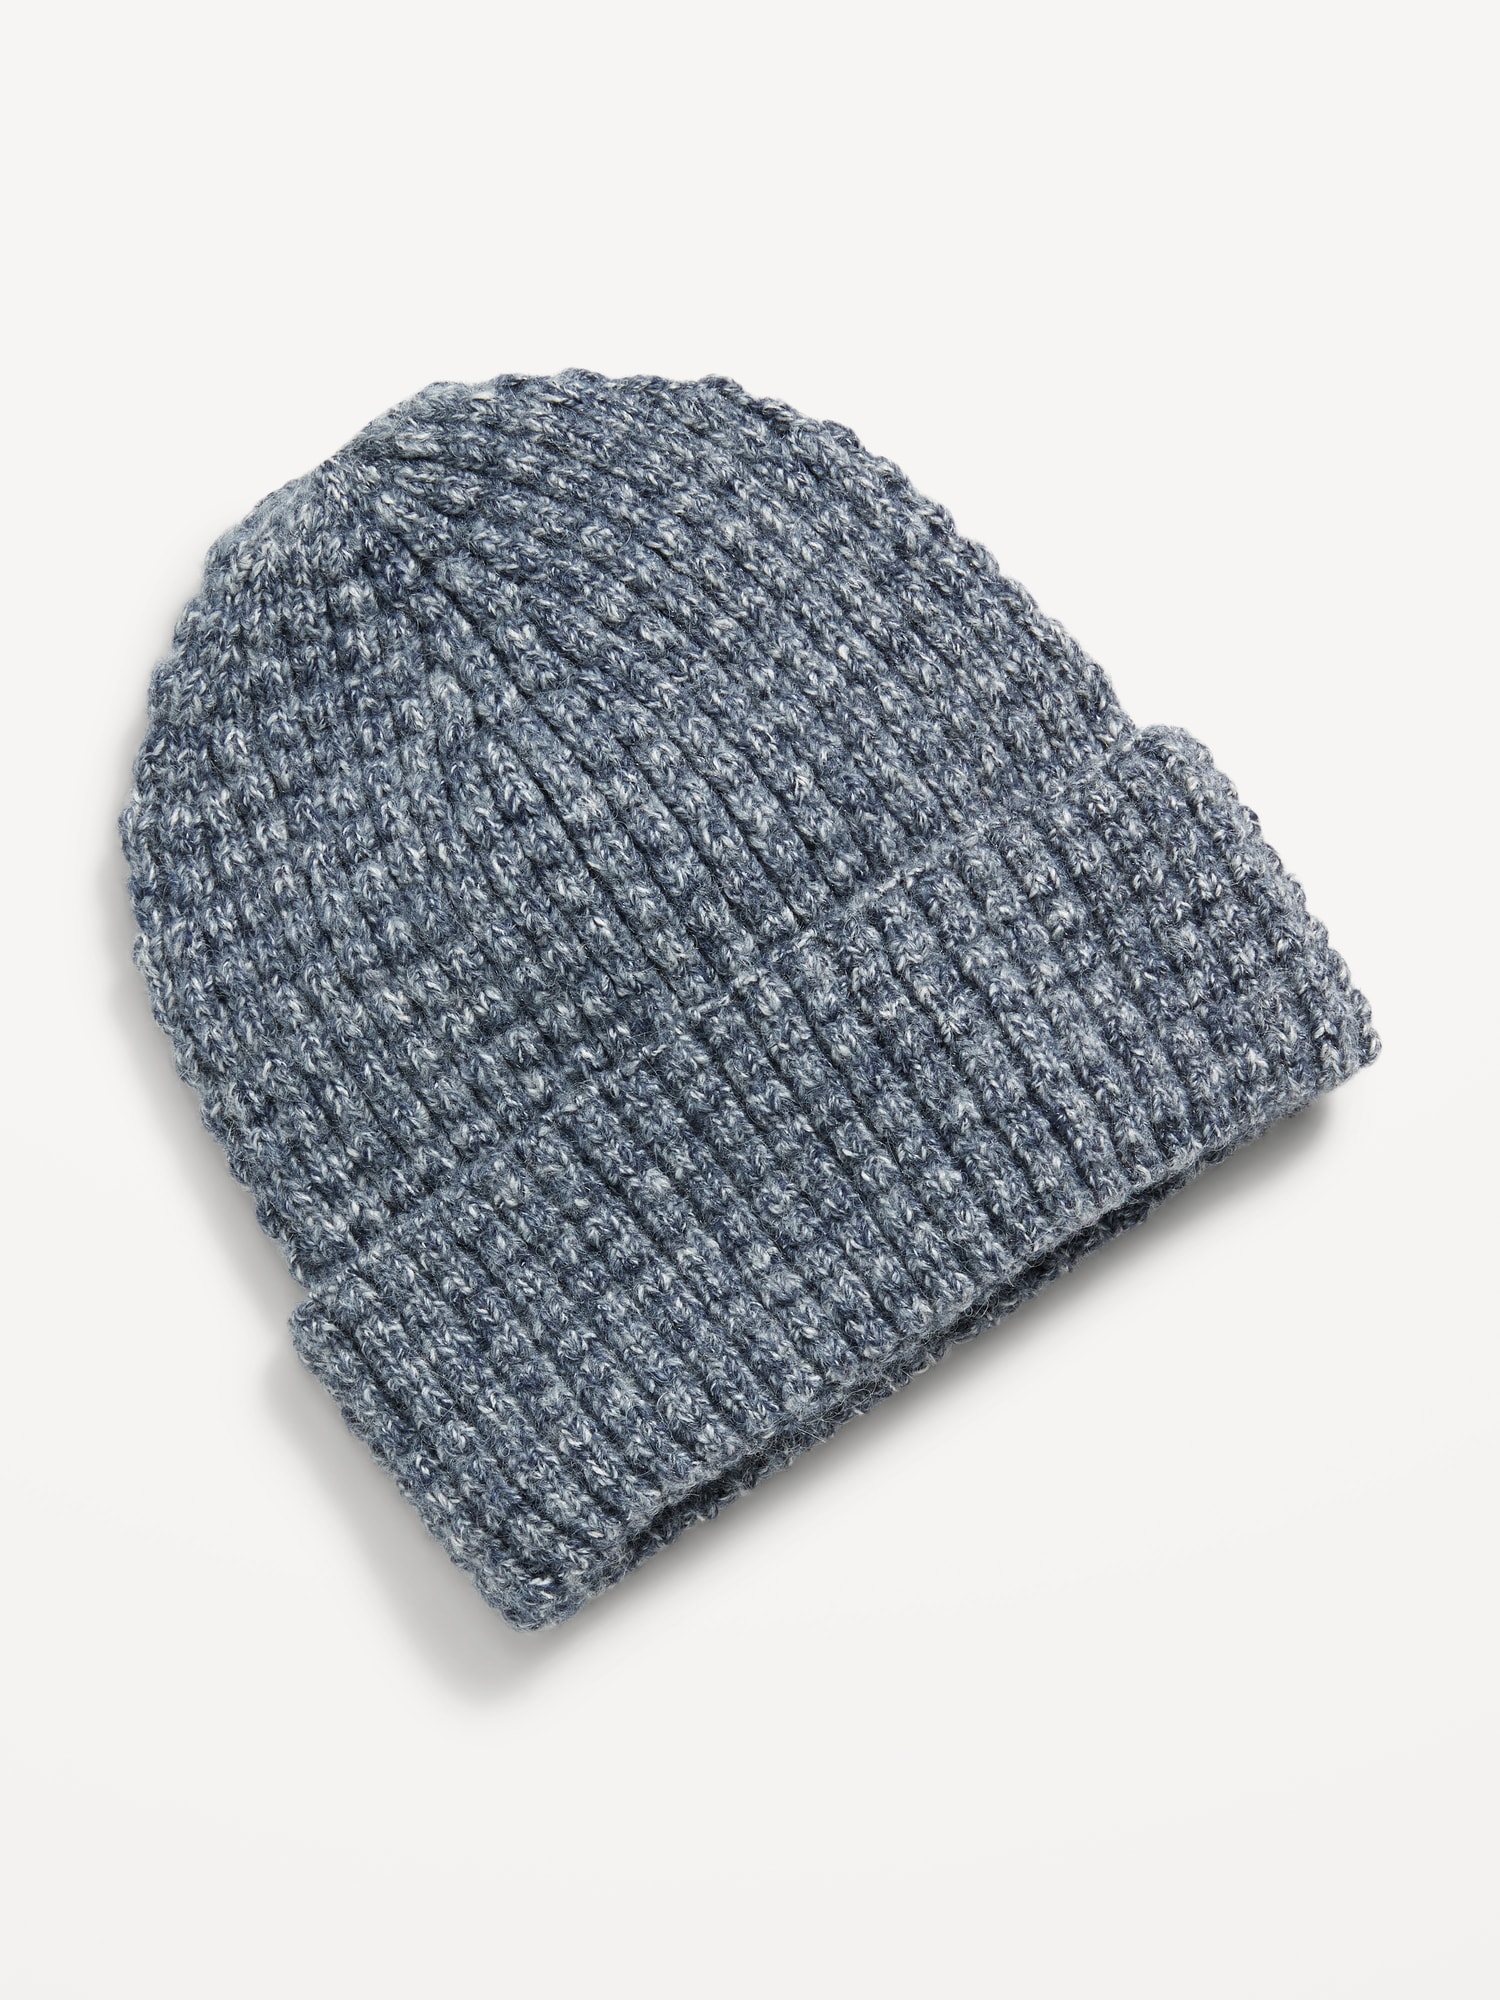 Beanie | Old for Adults Navy Gender-Neutral Waffle-Knit